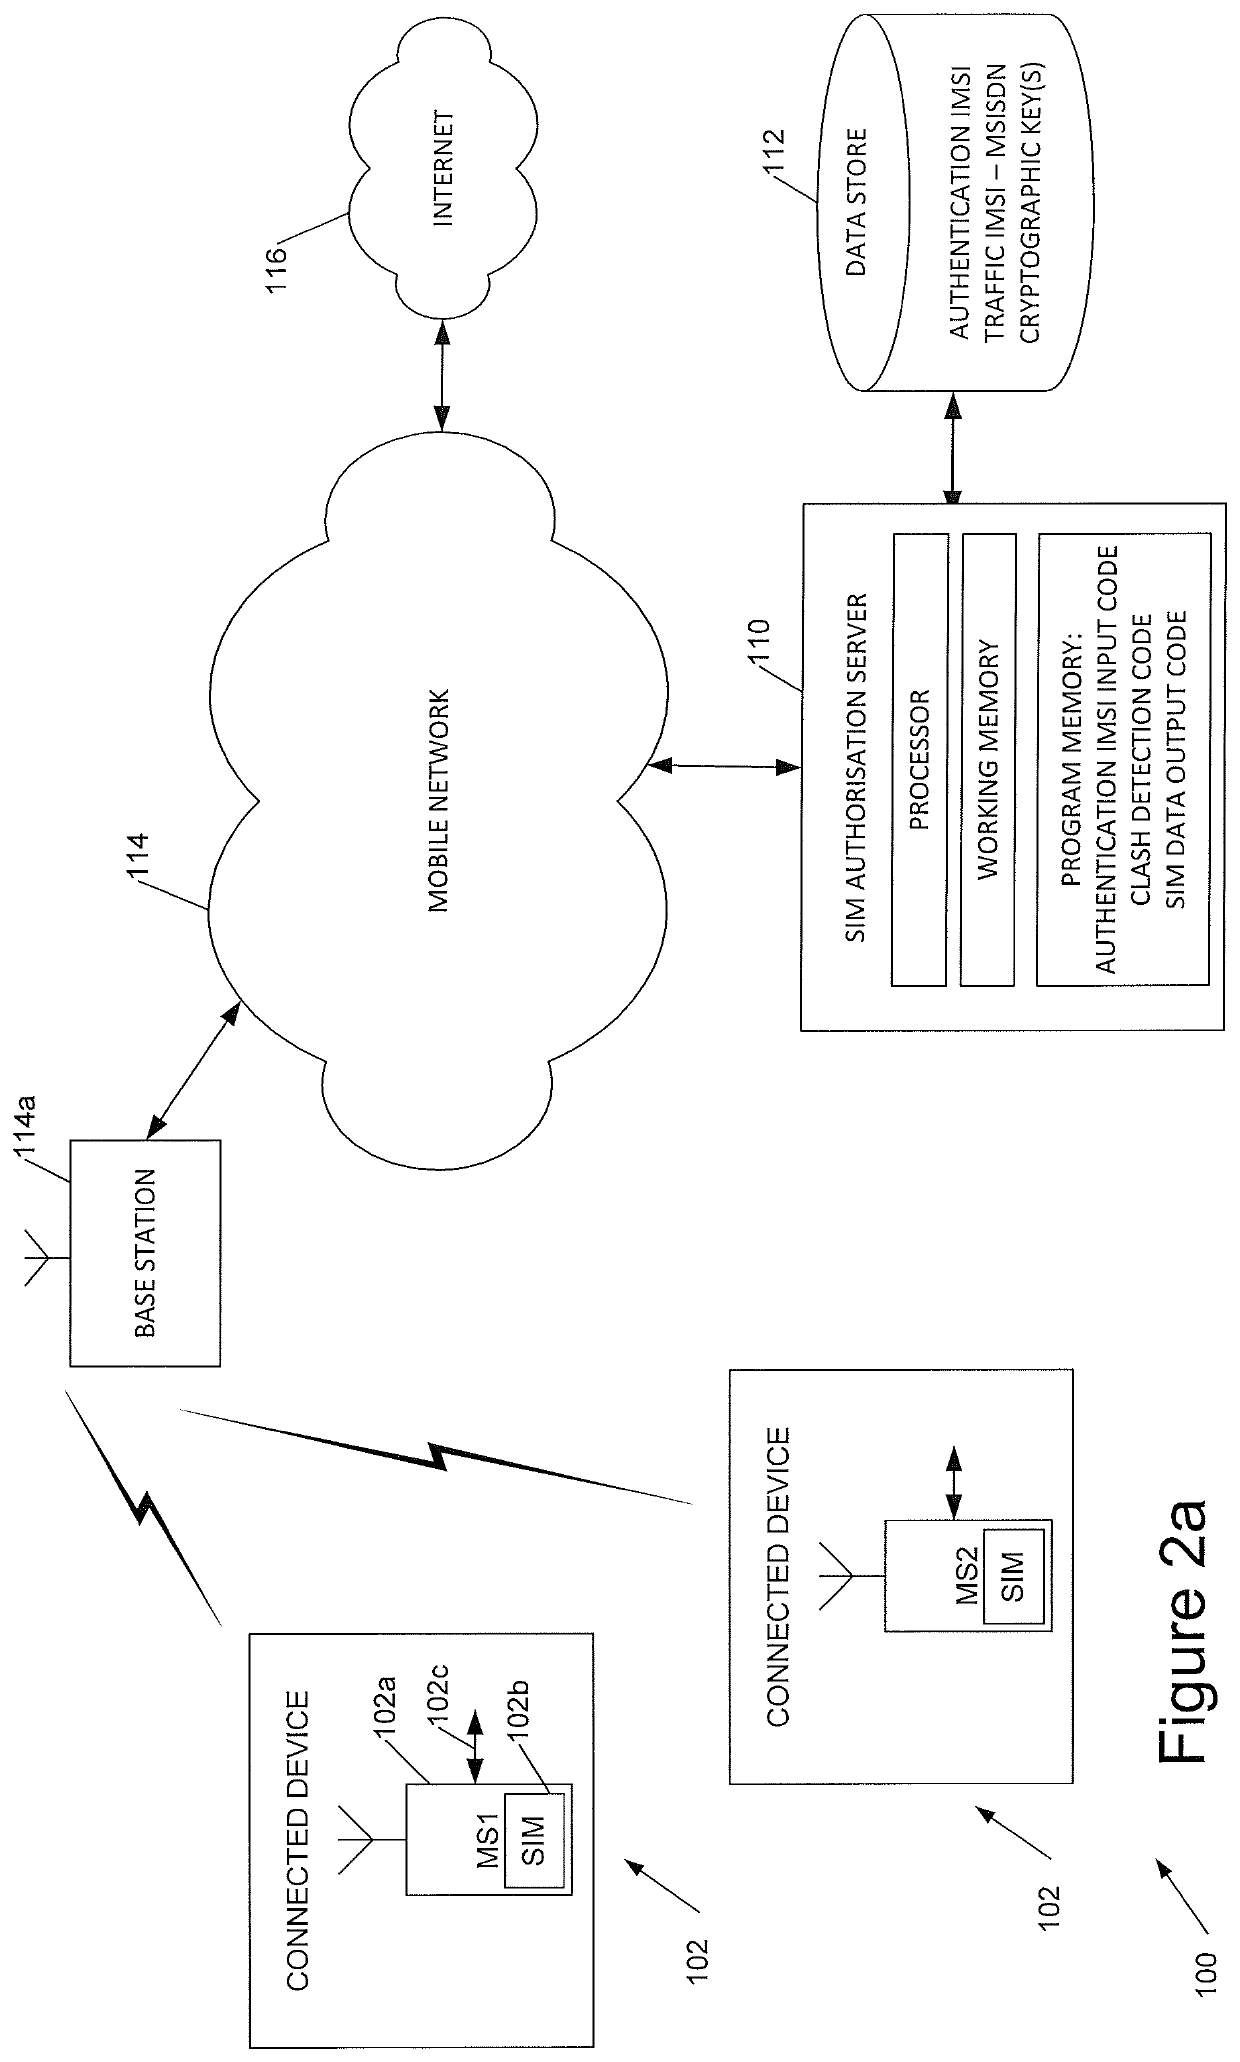 Network communications for connected devices